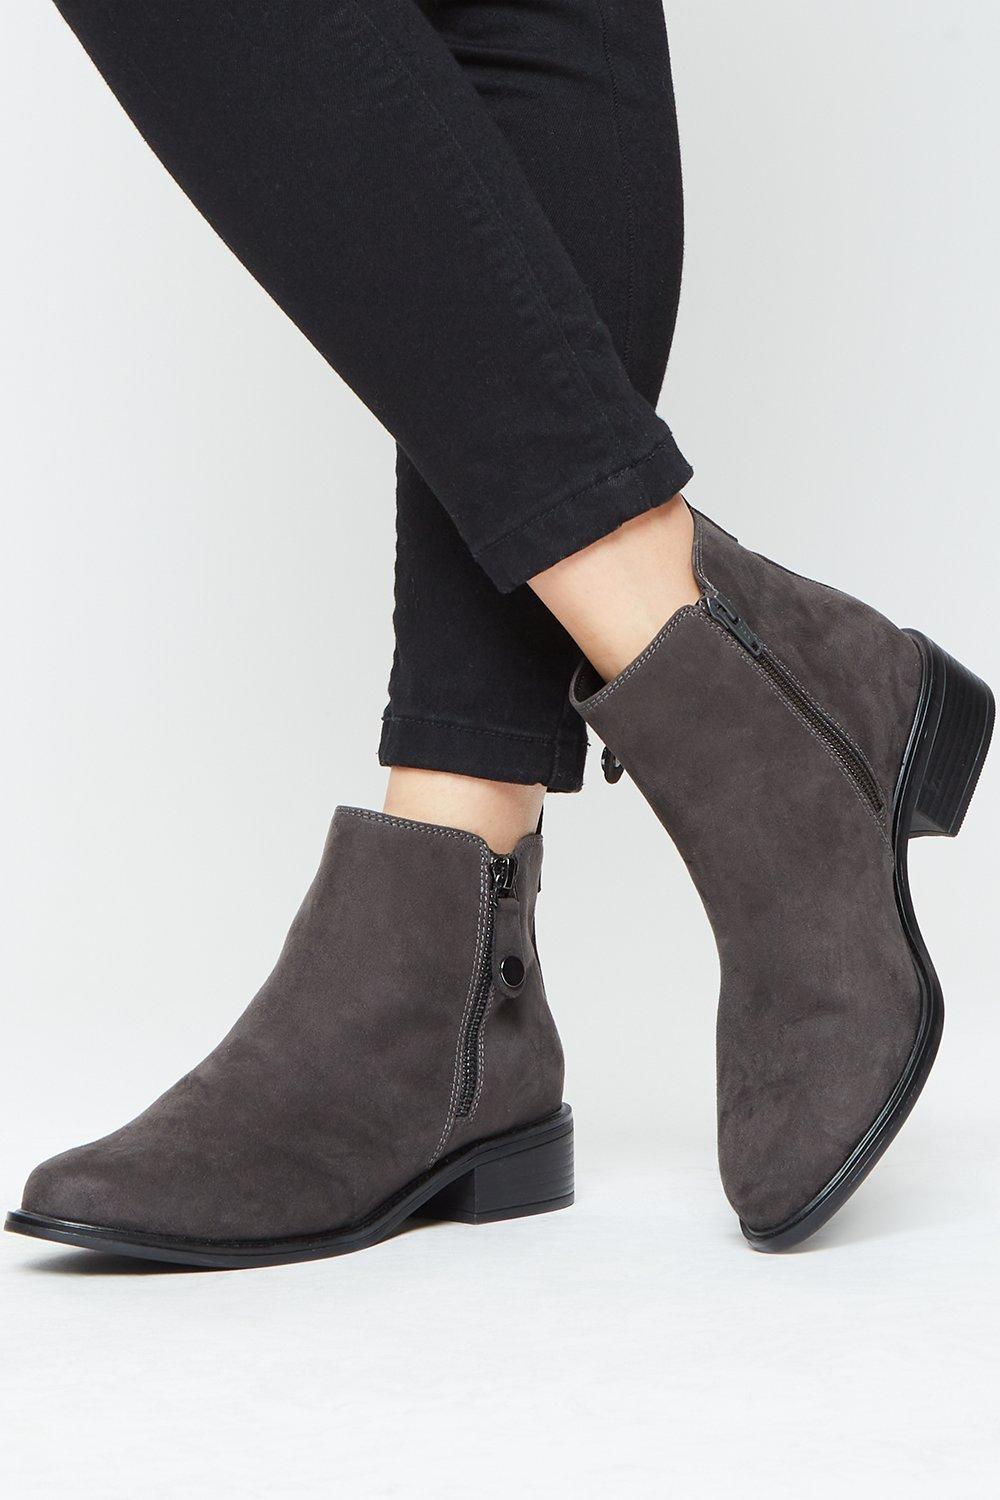 Women’s Wide Fit Mable Side Zip Ankle Boots - grey - 6